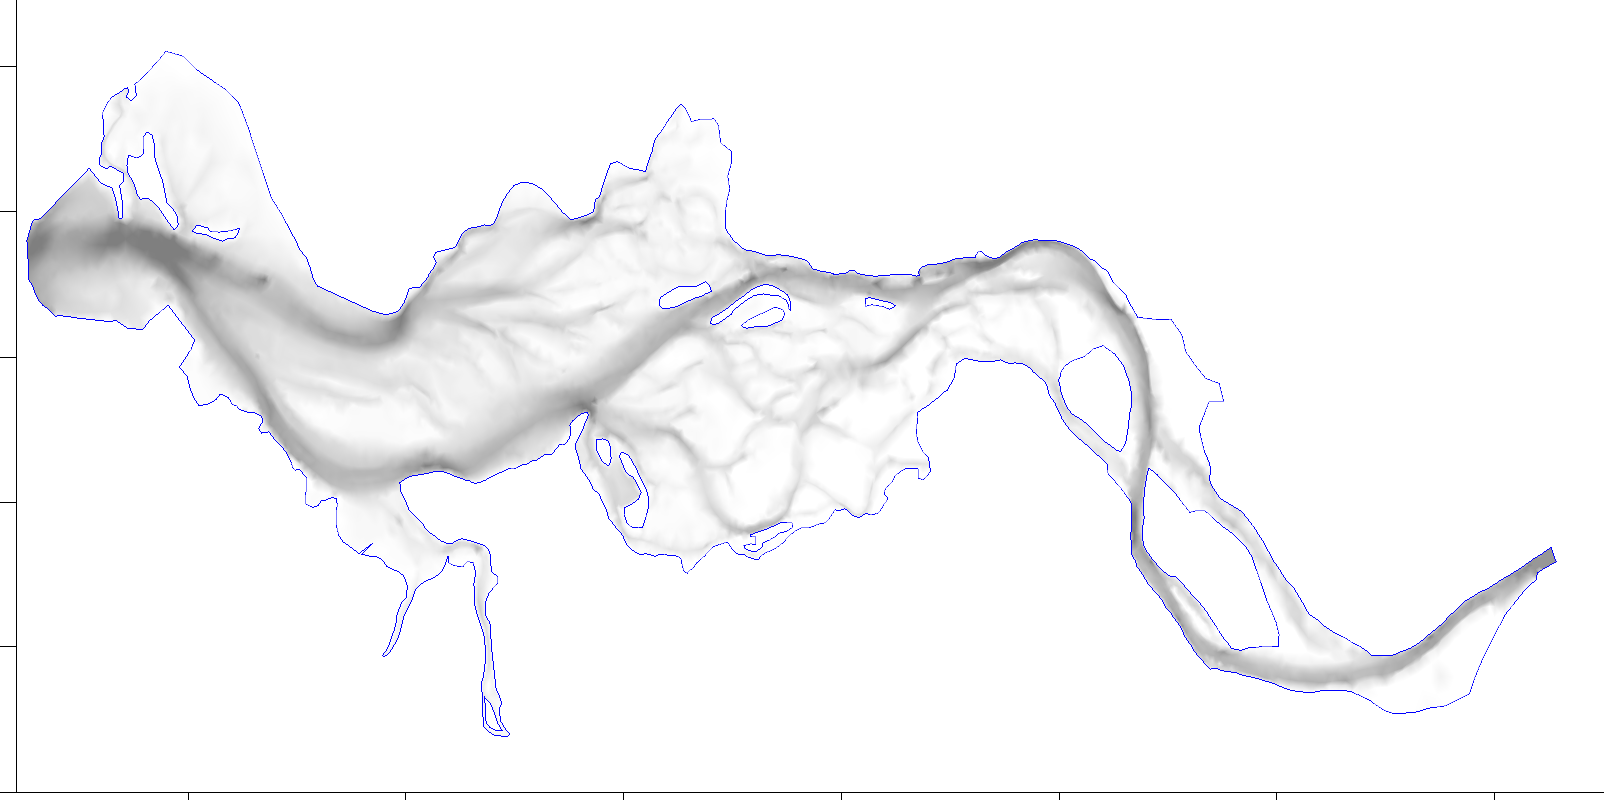 DB16 outline and bathymetry